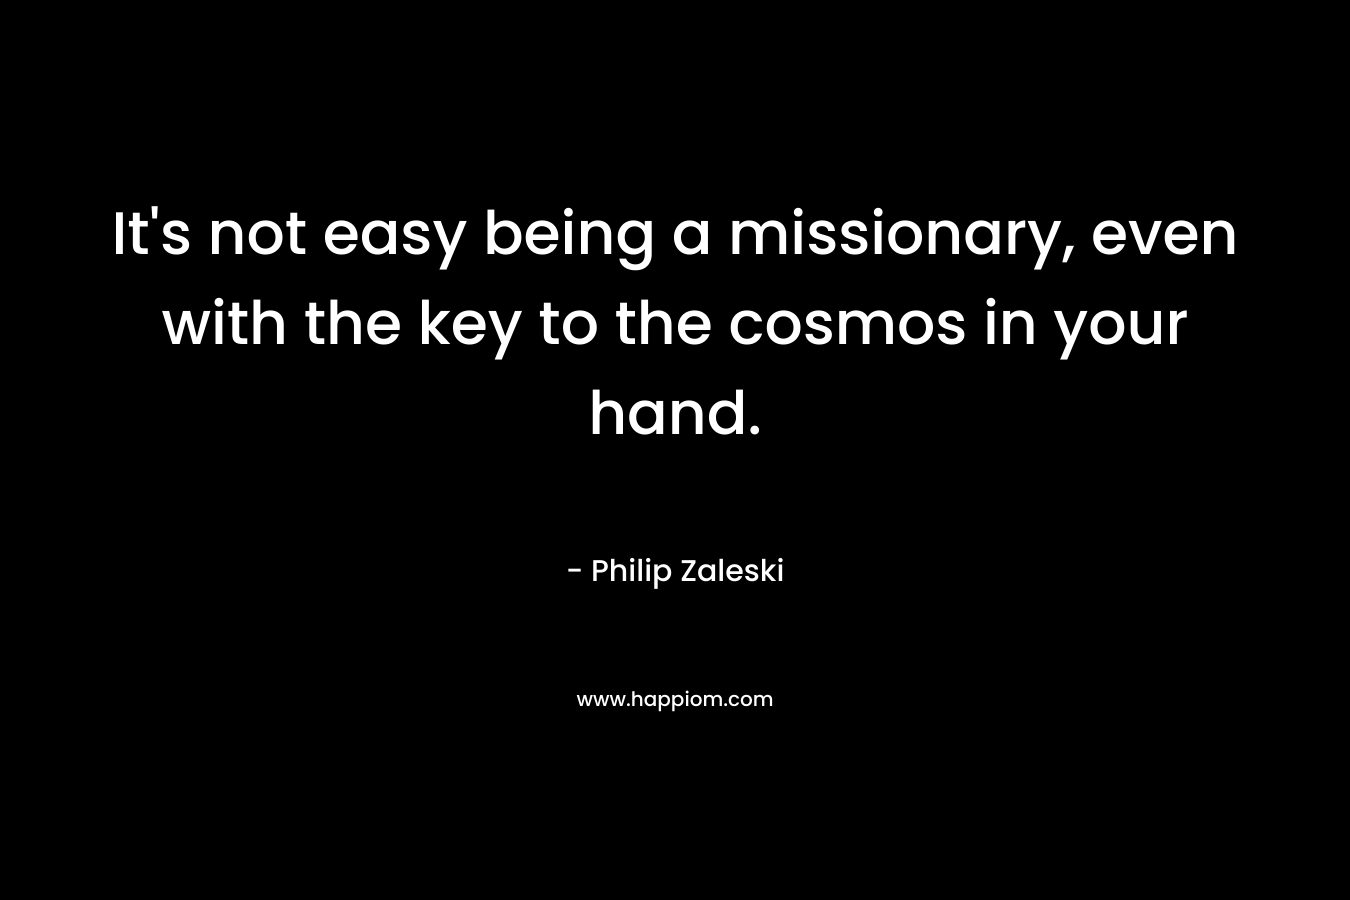 It’s not easy being a missionary, even with the key to the cosmos in your hand. – Philip Zaleski